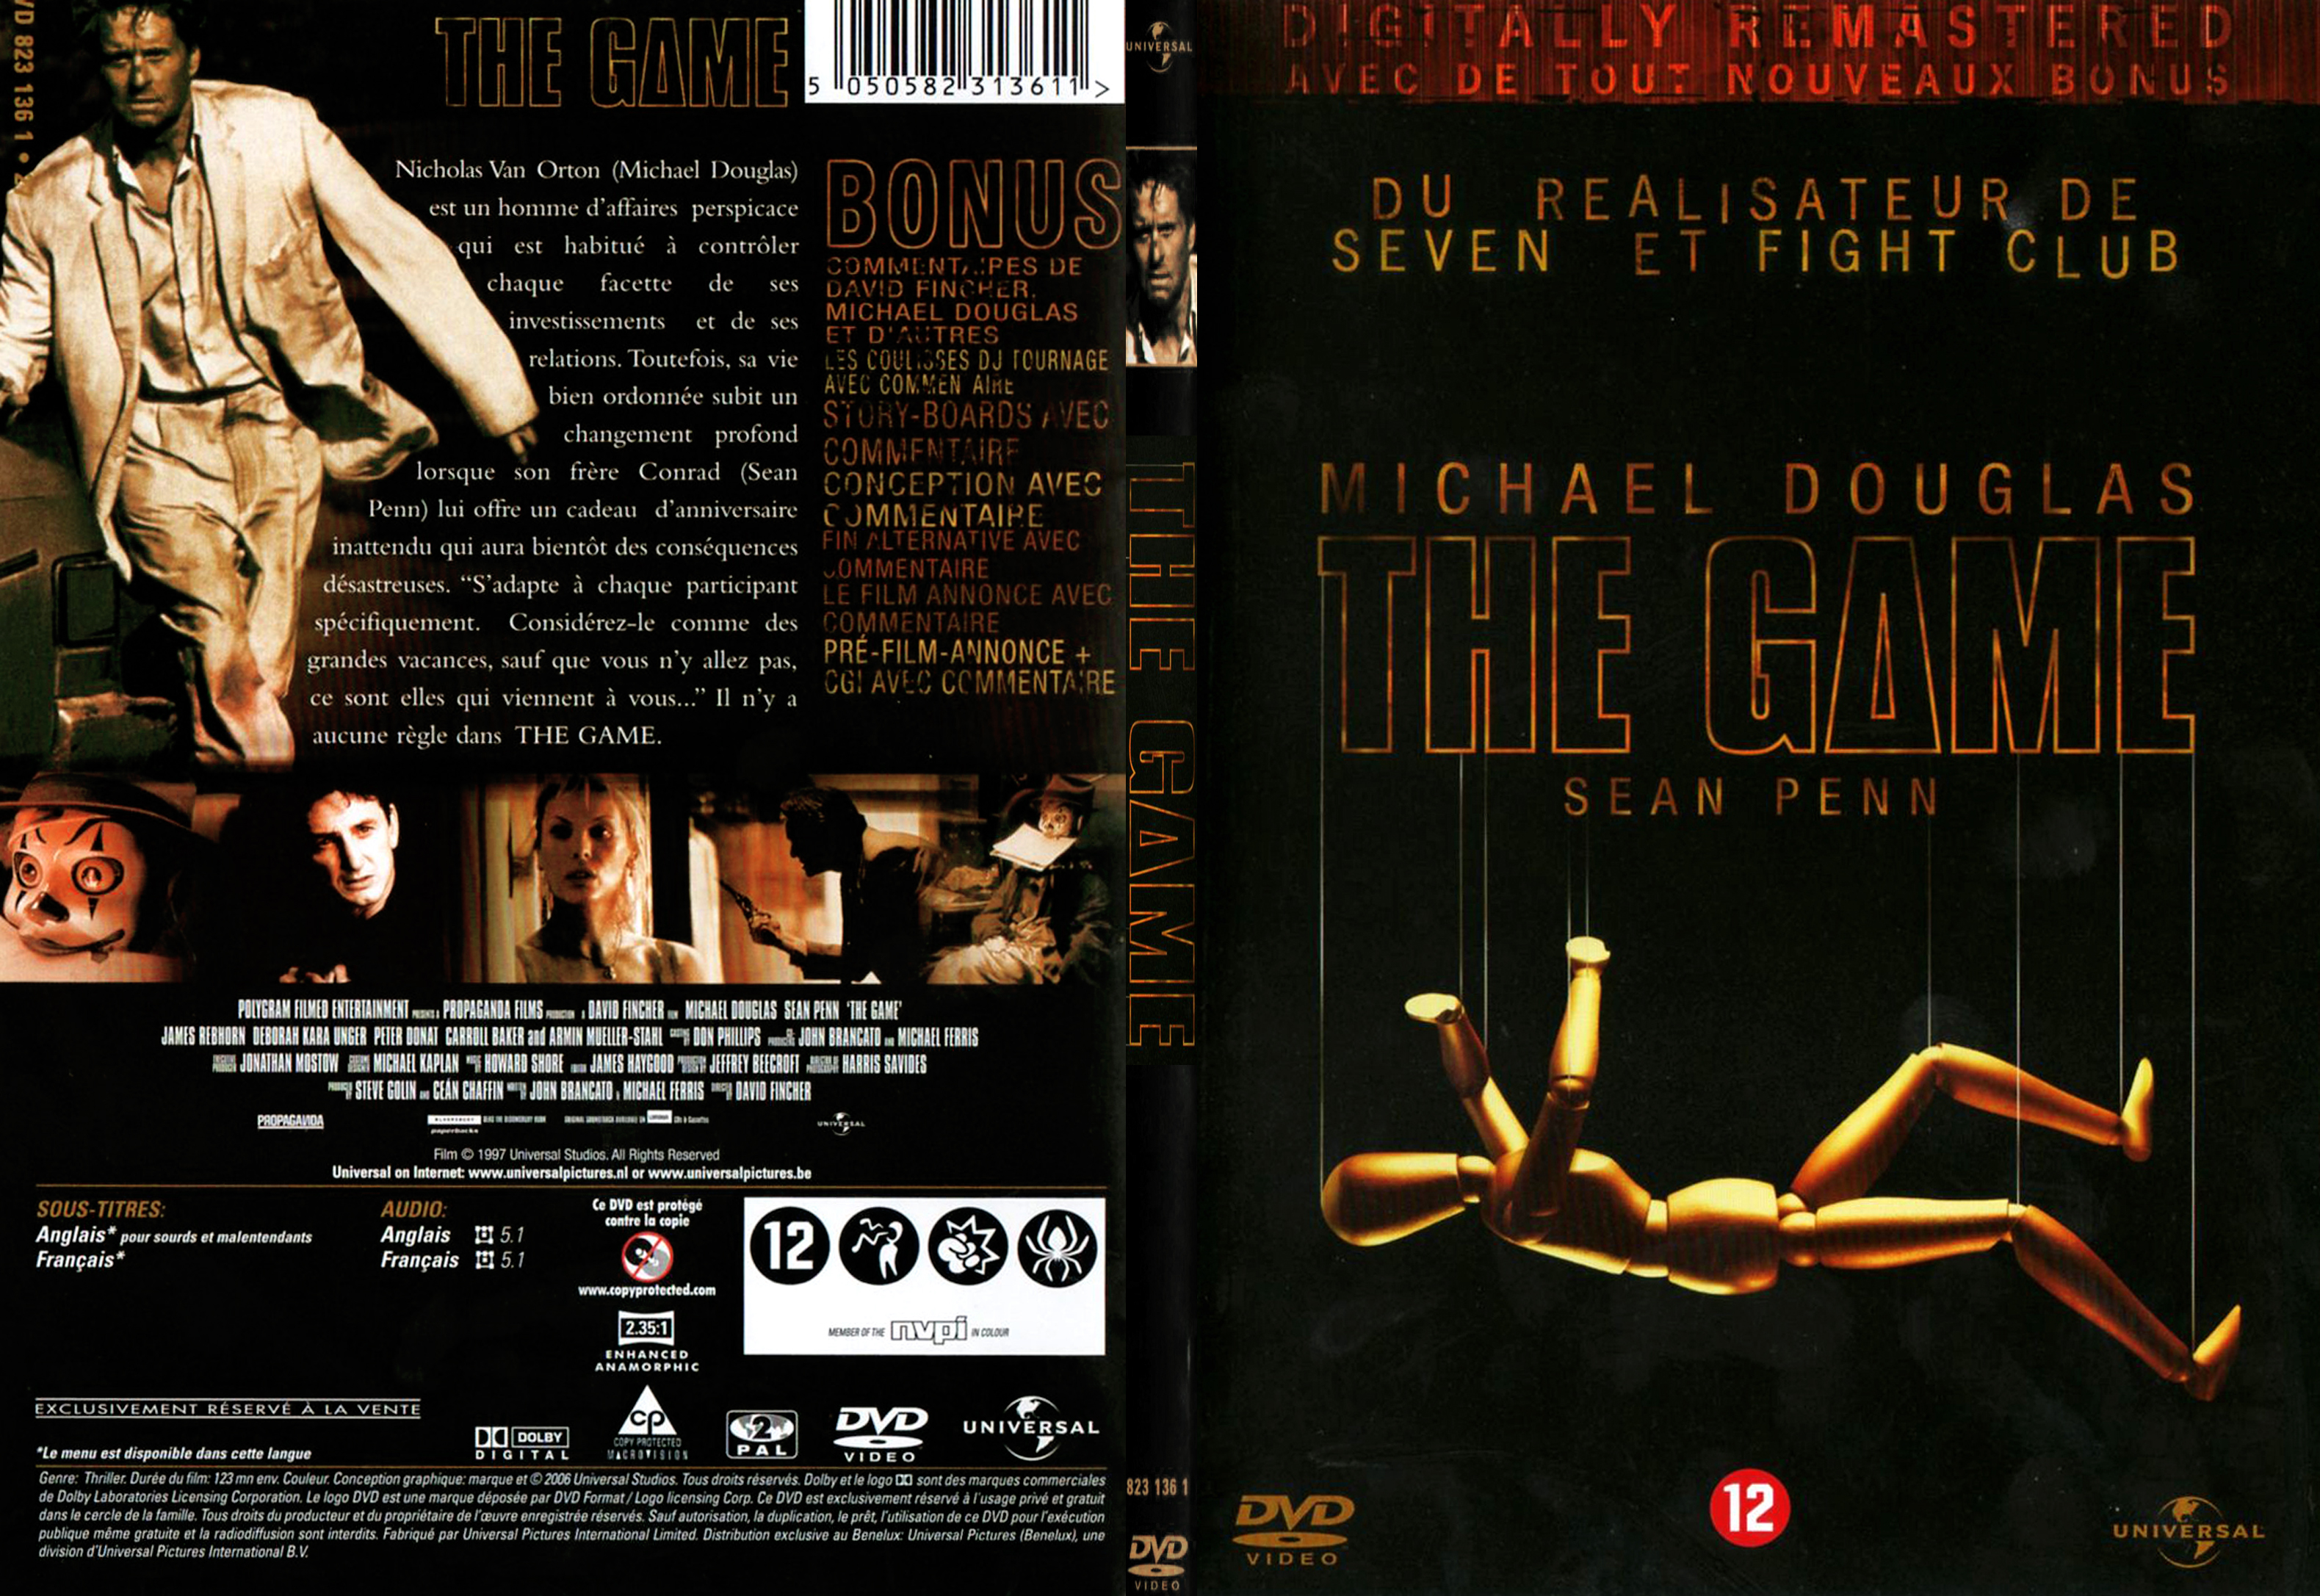 Jaquette DVD The game v3